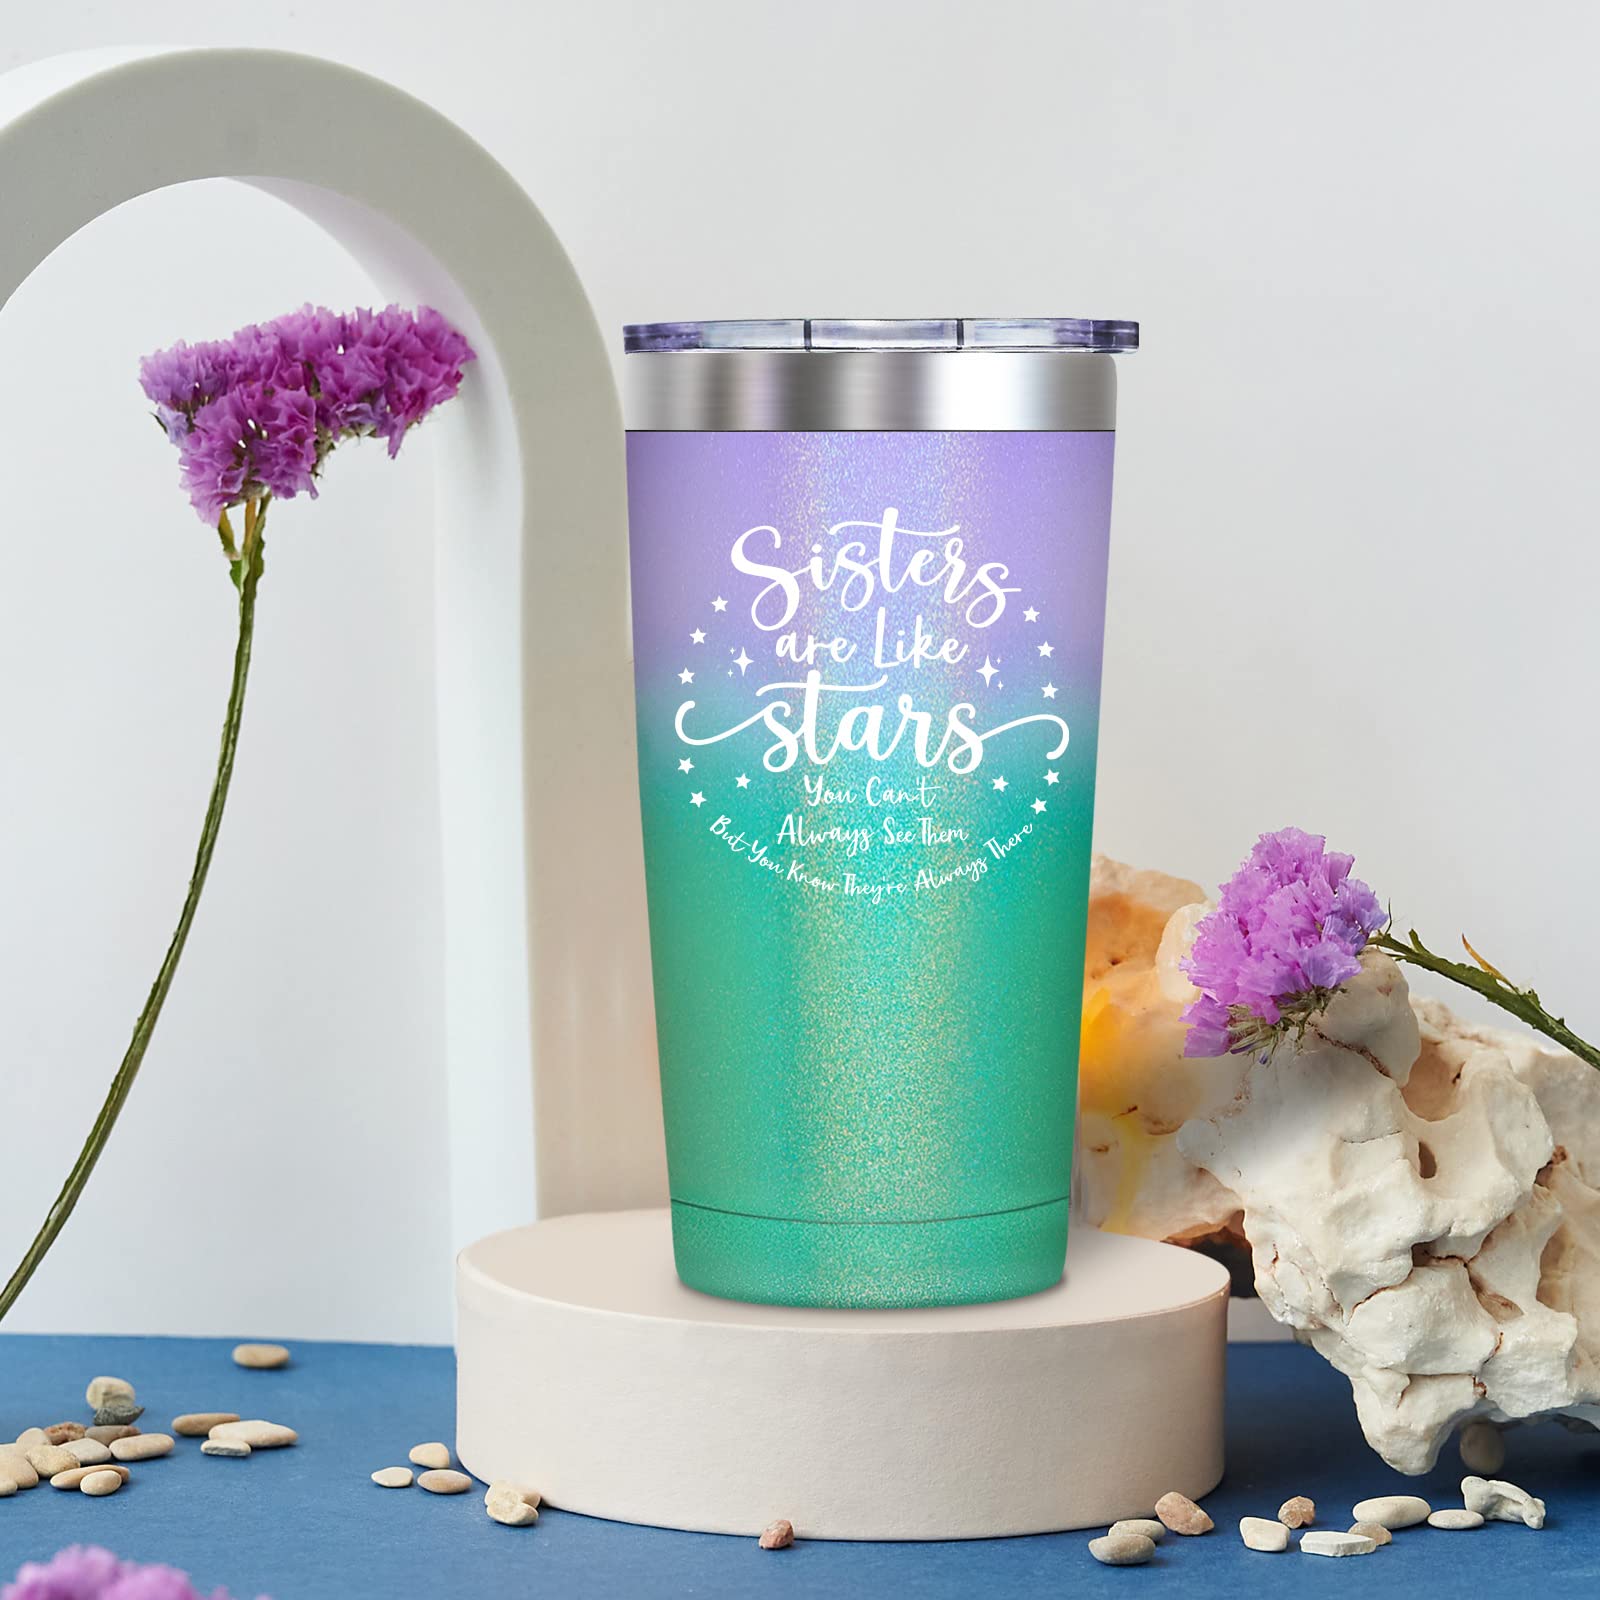 SpenMeta Sisters Gifts from Sister - Unique Gifts for Sister, Funny Sister Birthday Gifts from Sister, Little Sister, Big Sister Present Ideas Christmas Graduation Gift - Cup Tumbler